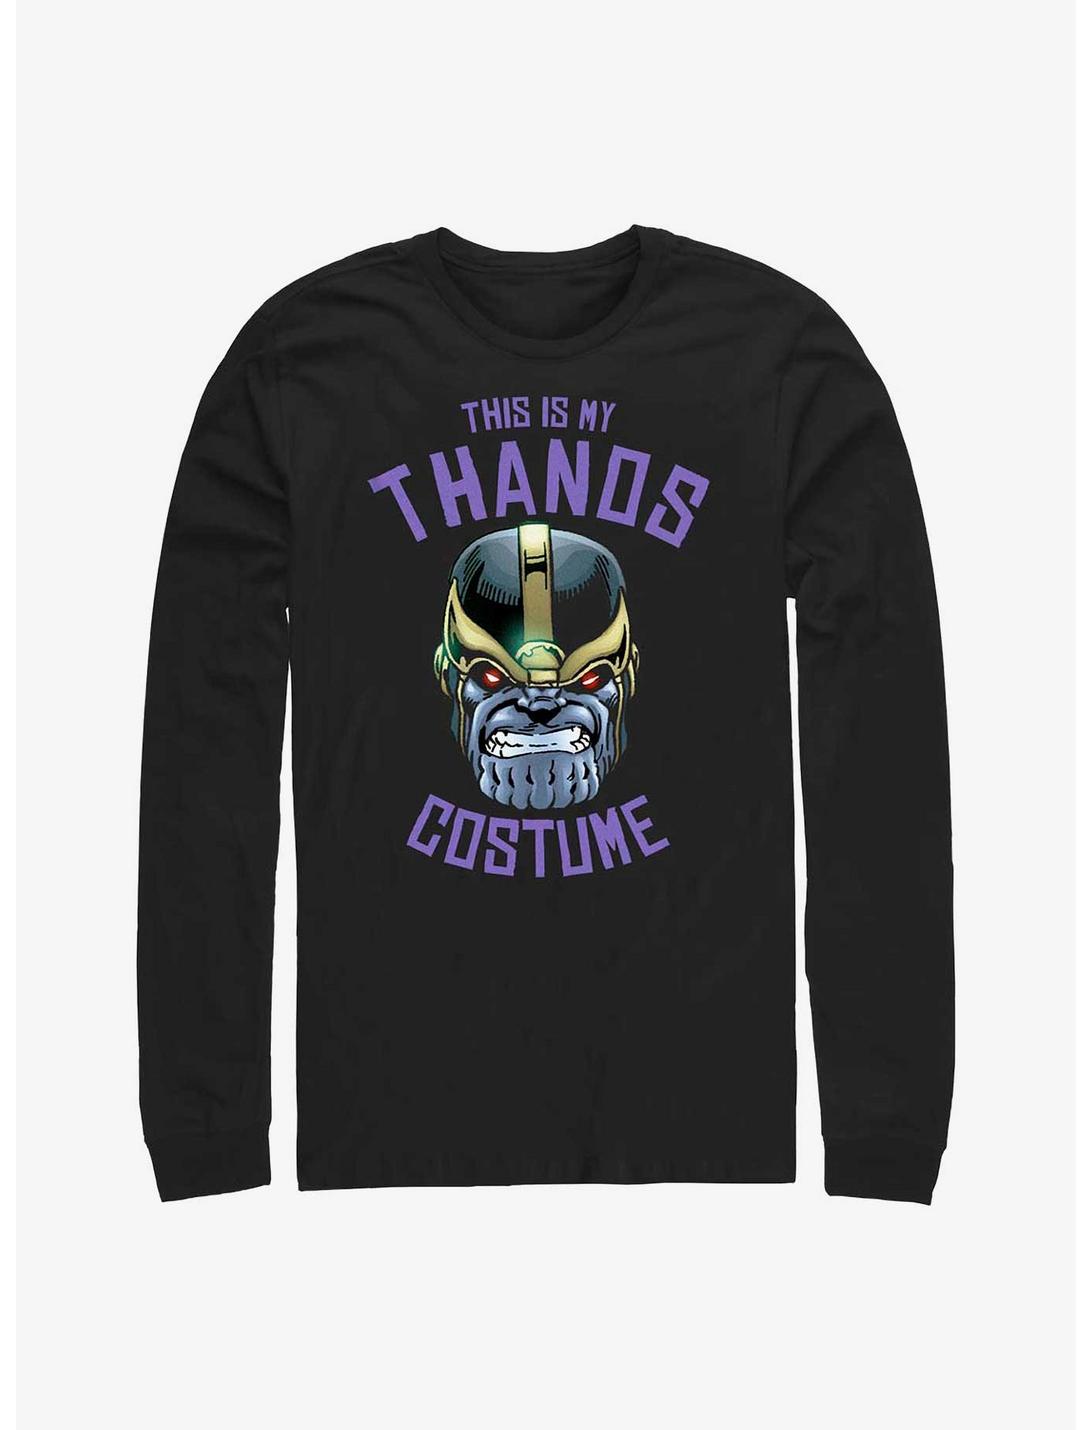 Marvel Avengers This Is My Thanos Costume Long-Sleeve T-Shirt, BLACK, hi-res